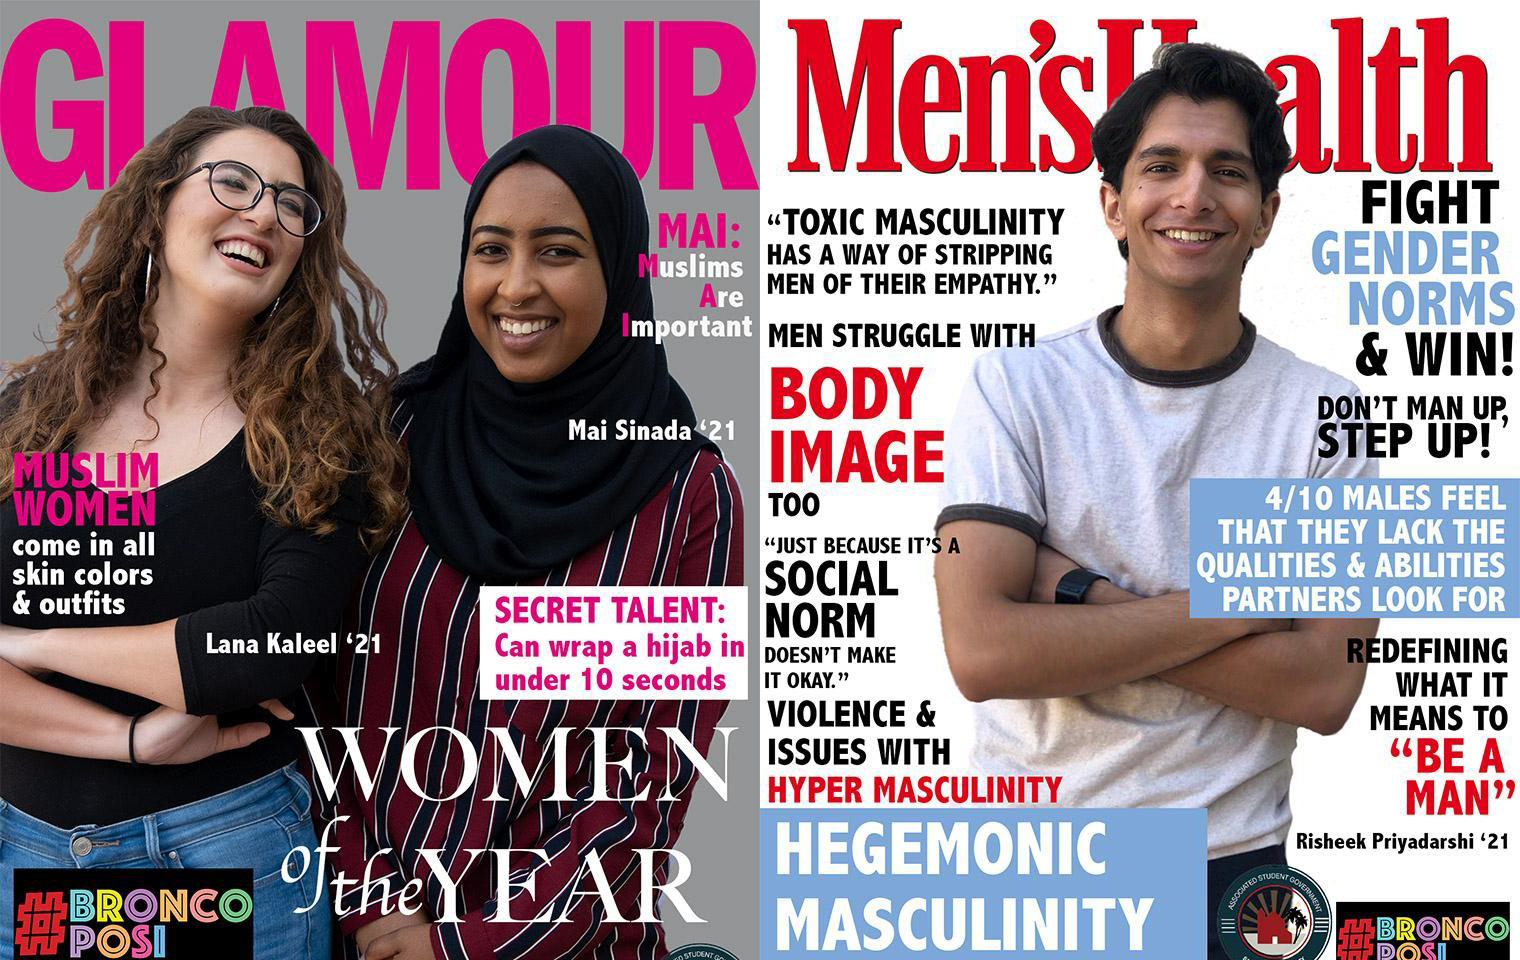 Three students photoshopped onto covers of Glamour and Men's Health